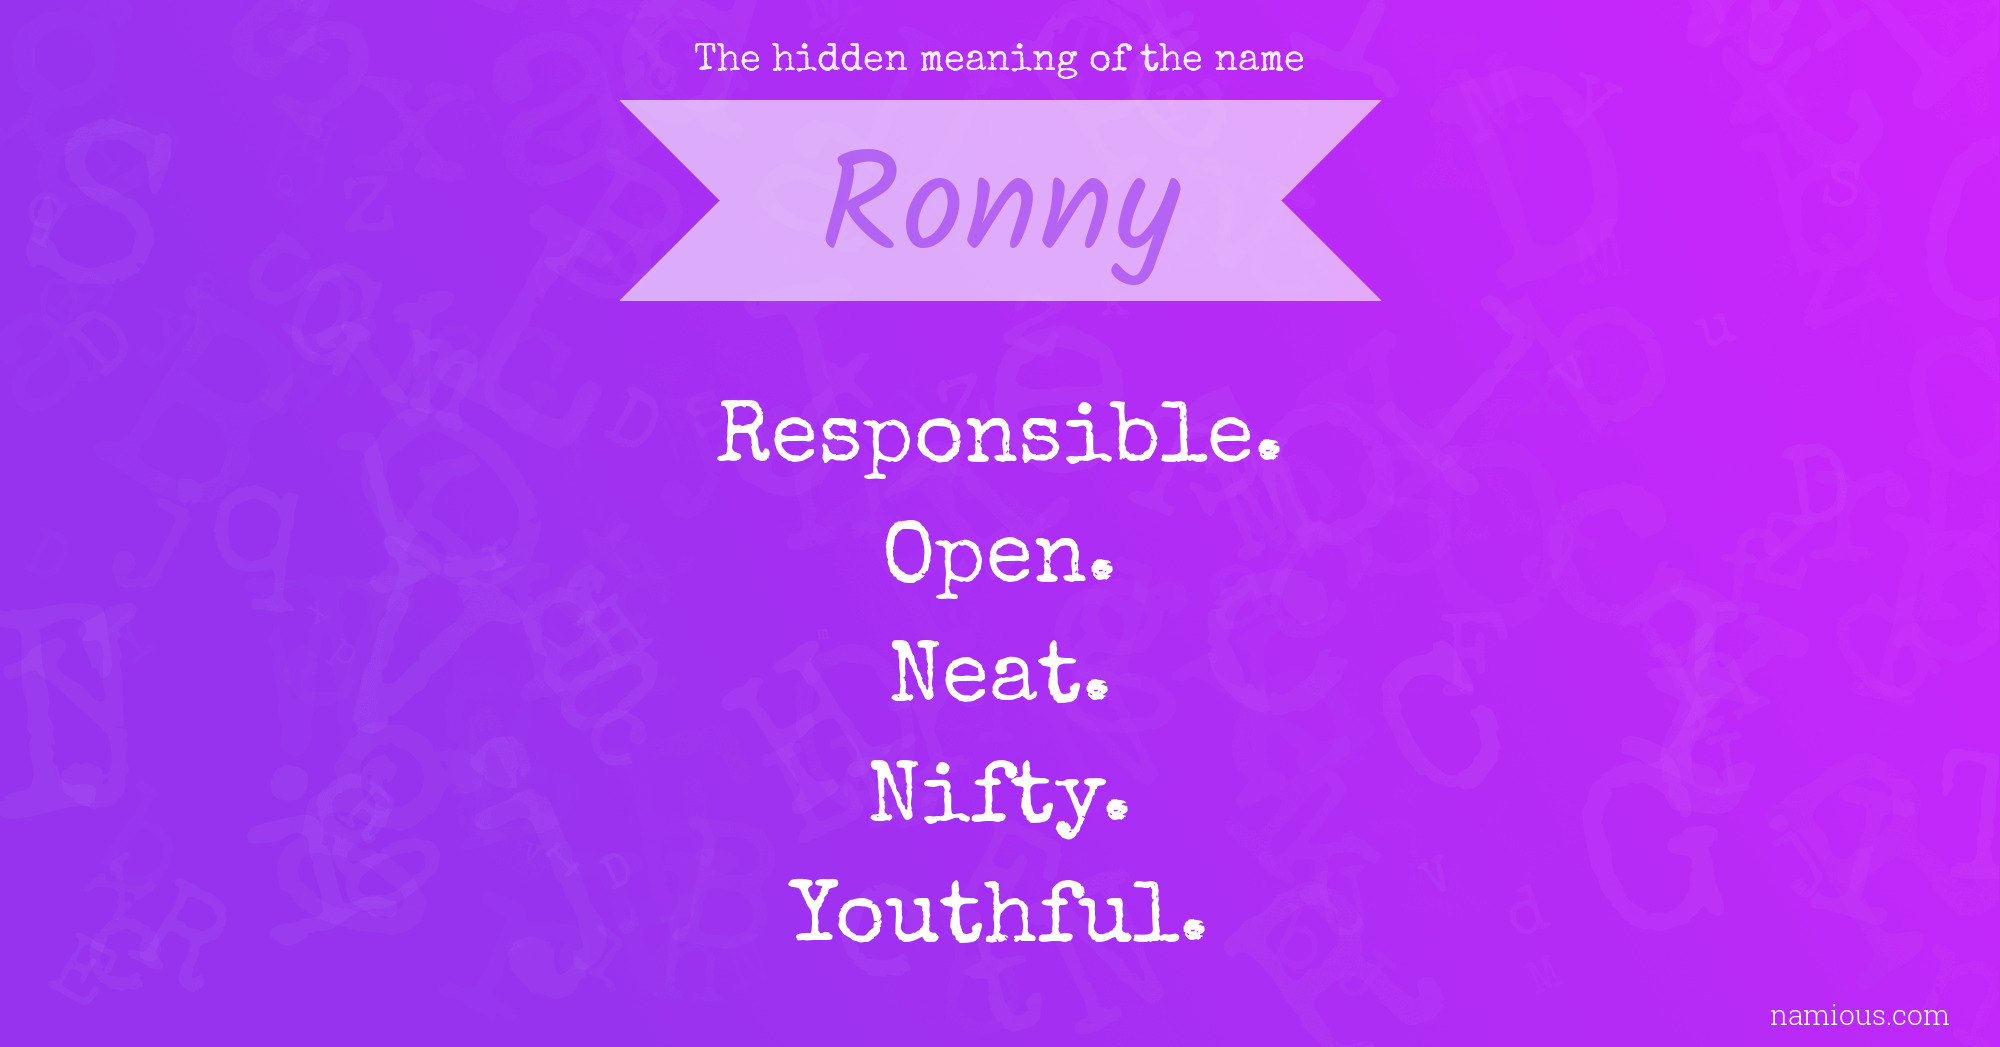 The hidden meaning of the name Ronny